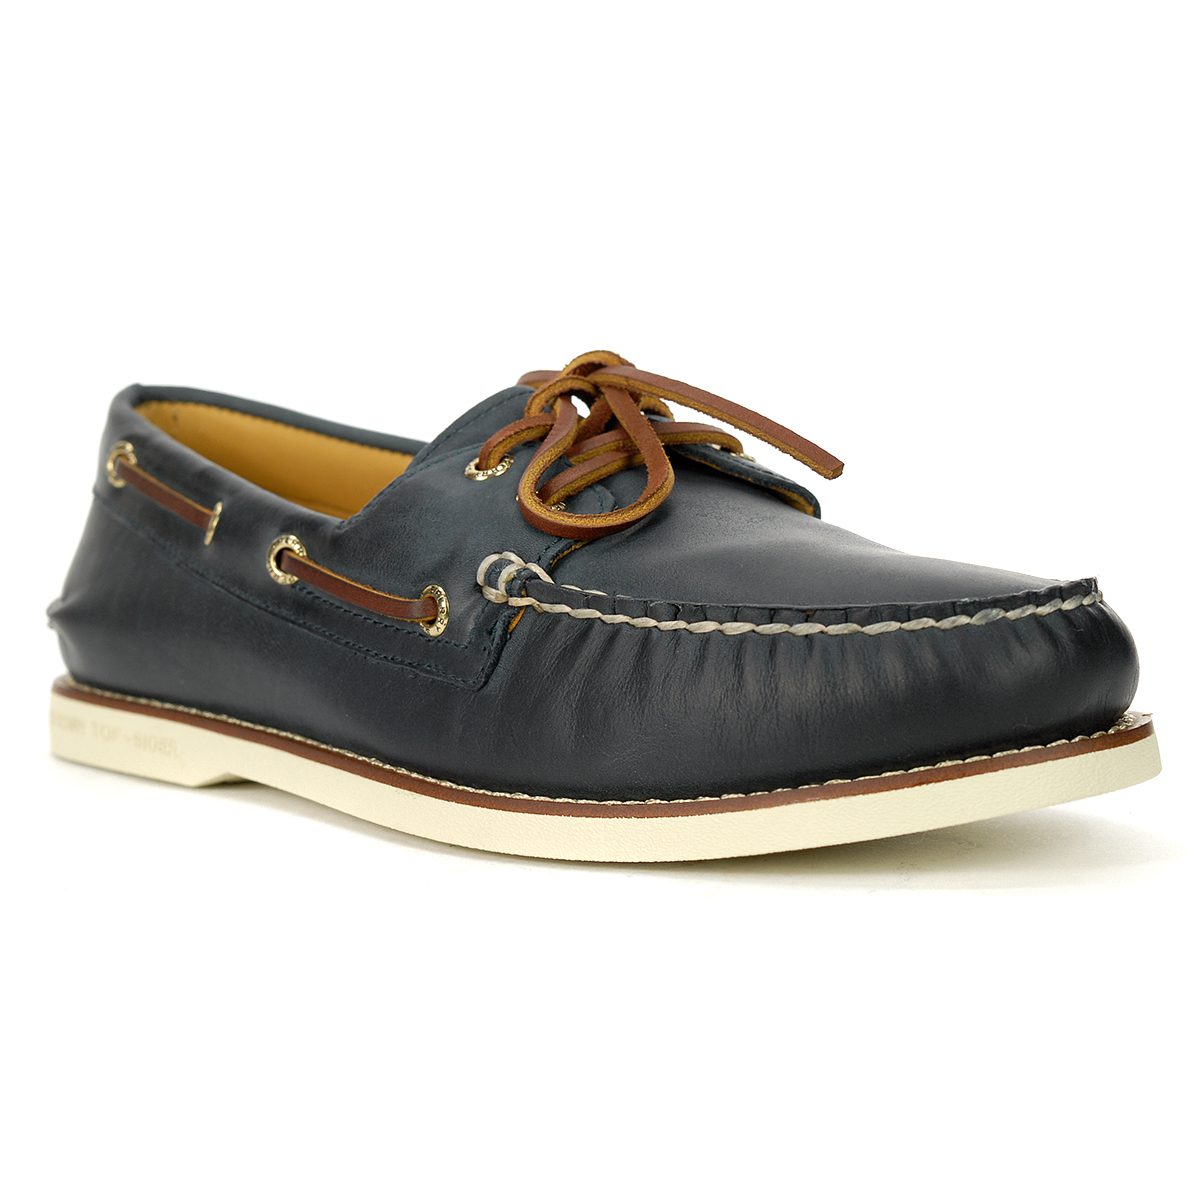 Sperry Men's Gold Cup Authentic Original 2-Eye Navy Boat Shoes STS15803 ...